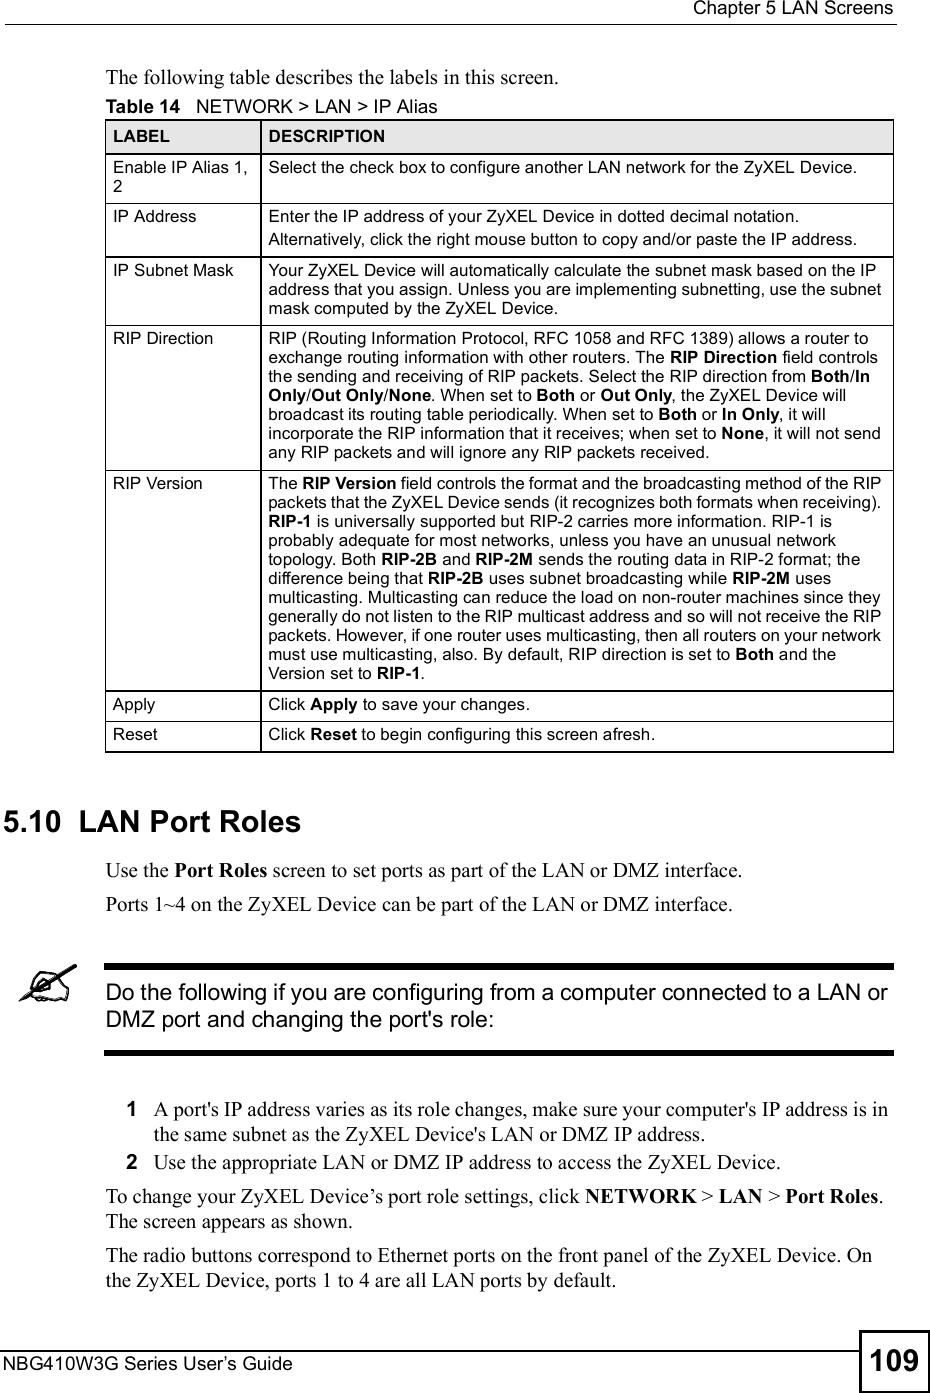  Chapter 5LAN ScreensNBG410W3G Series User s Guide 109The following table describes the labels in this screen.5.10  LAN Port RolesUse the Port Roles screen to set ports as part of the LAN or DMZ interface. Ports 1~4 on the ZyXEL Device can be part of the LAN or DMZ interface.Do the following if you are configuring from a computer connected to a LAN or DMZ port and changing the port&apos;s role:1A port&apos;s IP address varies as its role changes, make sure your computer&apos;s IP address is in the same subnet as the ZyXEL Device&apos;s LAN or DMZ IP address.2Use the appropriate LAN or DMZ IP address to access the ZyXEL Device.To change your ZyXEL Device!s port role settings, click NETWORK &gt; LAN &gt; Port Roles. The screen appears as shown.The radio buttons correspond to Ethernet ports on the front panel of the ZyXEL Device. On the ZyXEL Device, ports 1 to 4 are all LAN ports by default.  Table 14   NETWORK &gt; LAN &gt; IP AliasLABEL DESCRIPTIONEnable IP Alias 1, 2Select the check box to configure another LAN network for the ZyXEL Device.IP AddressEnter the IP address of your ZyXEL Device in dotted decimal notation. Alternatively, click the right mouse button to copy and/or paste the IP address.IP Subnet MaskYour ZyXEL Device will automatically calculate the subnet mask based on the IP address that you assign. Unless you are implementing subnetting, use the subnet mask computed by the ZyXEL Device.RIP DirectionRIP (Routing Information Protocol, RFC 1058 and RFC 1389) allows a router to exchange routing information with other routers. The RIP Direction field controls the sending and receiving of RIP packets. Select the RIP direction from Both/In Only/Out Only/None. When set to Both or Out Only, the ZyXEL Device will broadcast its routing table periodically. When set to Both or In Only, it will incorporate the RIP information that it receives; when set to None, it will not send any RIP packets and will ignore any RIP packets received.RIP VersionThe RIP Version field controls the format and the broadcasting method of the RIP packets that the ZyXEL Device sends (it recognizes both formats when receiving). RIP-1 is universally supported but RIP-2 carries more information. RIP-1 is probably adequate for most networks, unless you have an unusual network topology. Both RIP-2B and RIP-2M sends the routing data in RIP-2 format; the difference being that RIP-2B uses subnet broadcasting while RIP-2M uses multicasting. Multicasting can reduce the load on non-router machines since they generally do not listen to the RIP multicast address and so will not receive the RIP packets. However, if one router uses multicasting, then all routers on your network must use multicasting, also. By default, RIP direction is set to Both and the Version set to RIP-1.ApplyClick Apply to save your changes.ResetClick Reset to begin configuring this screen afresh.